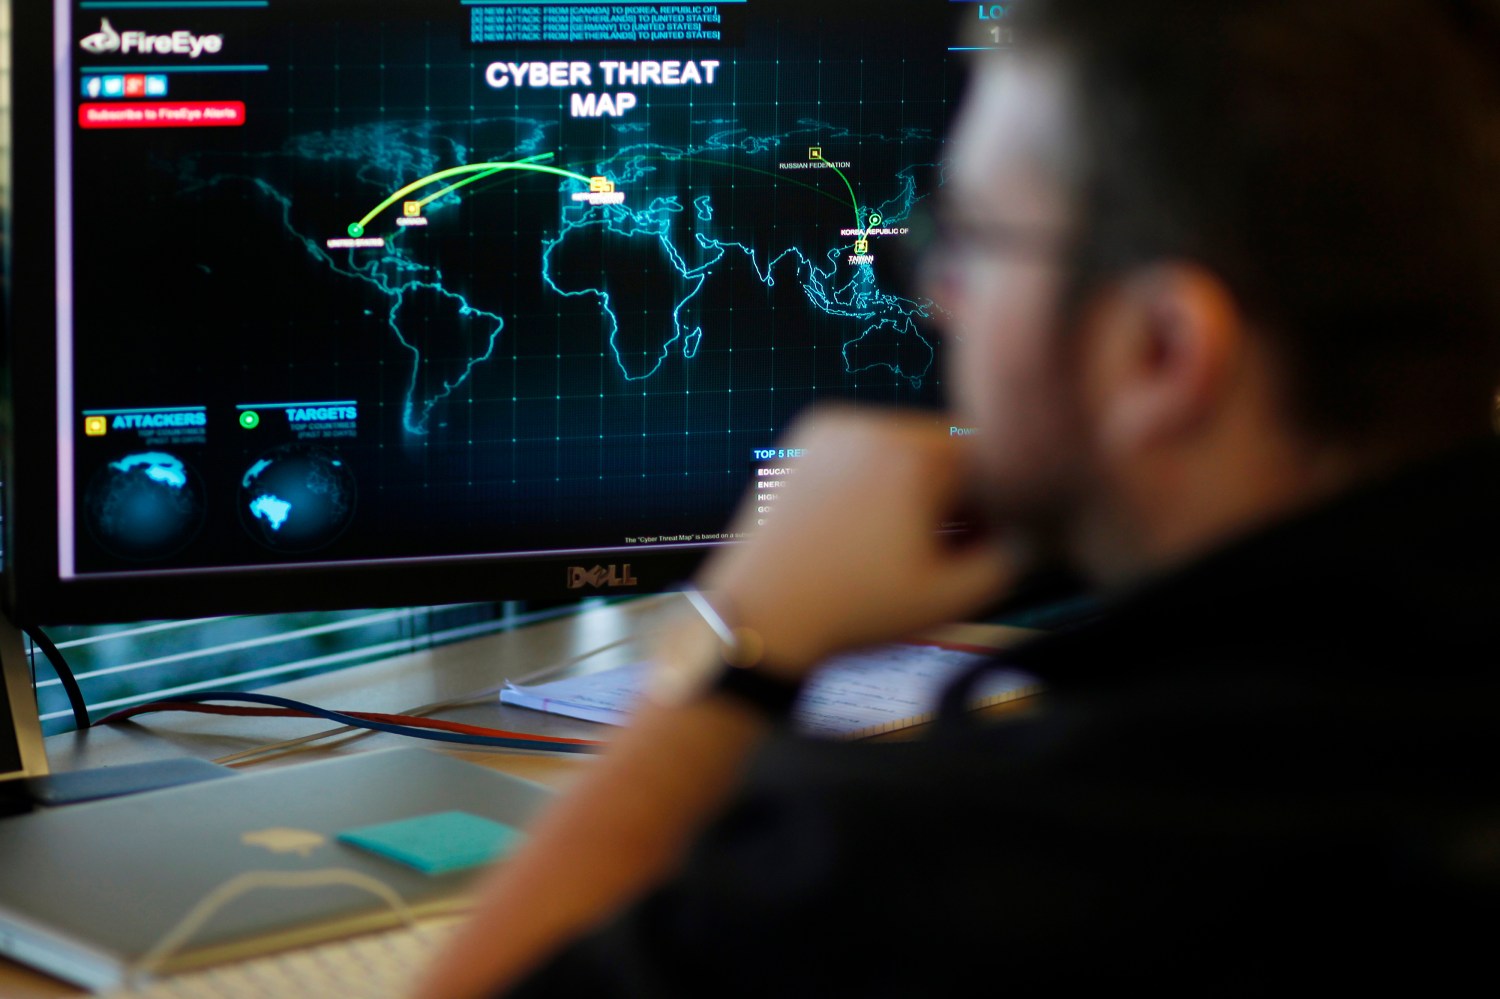 A FireEye information analyst works in front of a screen showing a near real-time map tracking cyber threats at the FireEye office in Milpitas, California, December 29, 2014. FireEye is the security firm hired by Sony to investigate last month's cyberattack against Sony Pictures. Picture taken December 29. REUTERS/Beck Diefenbach (UNITED STATES - Tags: BUSINESS SCIENCE TECHNOLOGY CRIME LAW) - RTR4JTQC